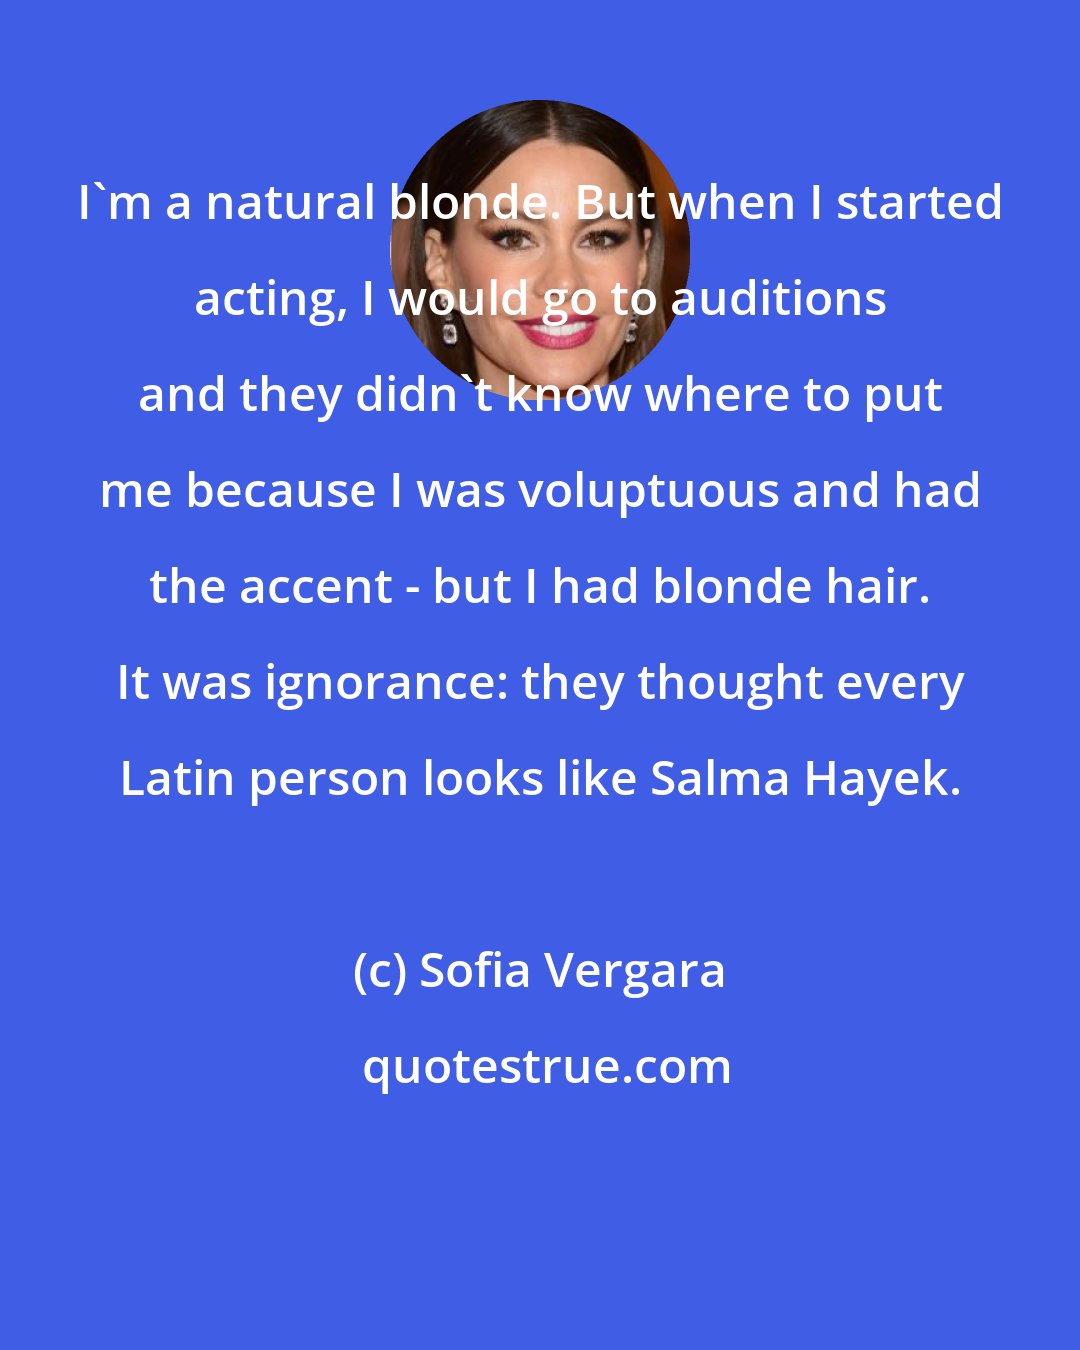 Sofia Vergara: I'm a natural blonde. But when I started acting, I would go to auditions and they didn't know where to put me because I was voluptuous and had the accent - but I had blonde hair. It was ignorance: they thought every Latin person looks like Salma Hayek.